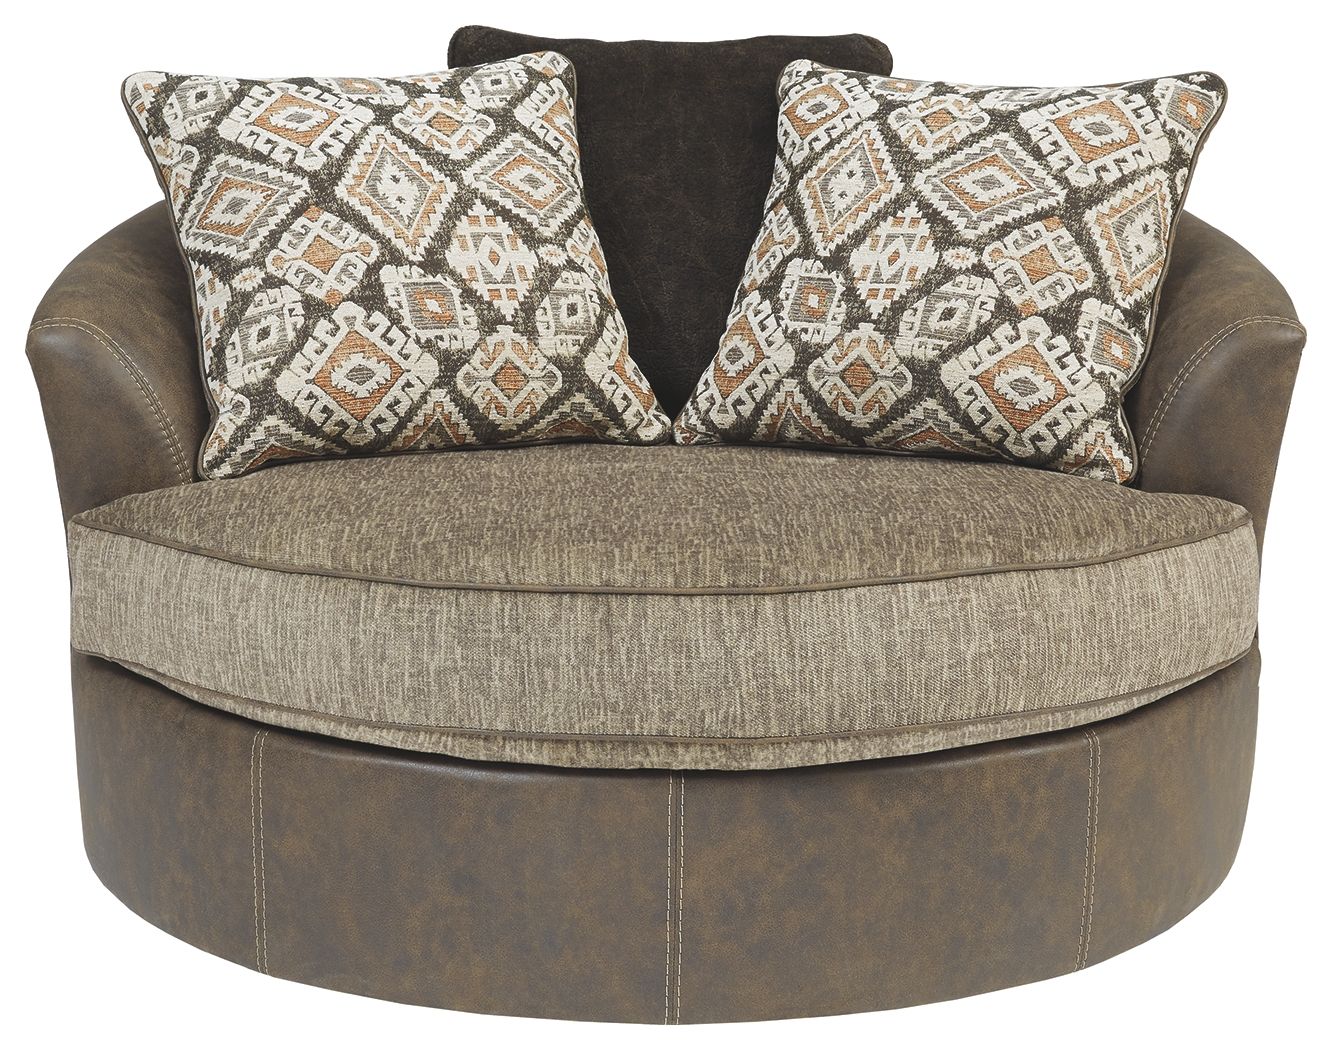 Abalone - Chocolate - Oversized Swivel Accent Chair